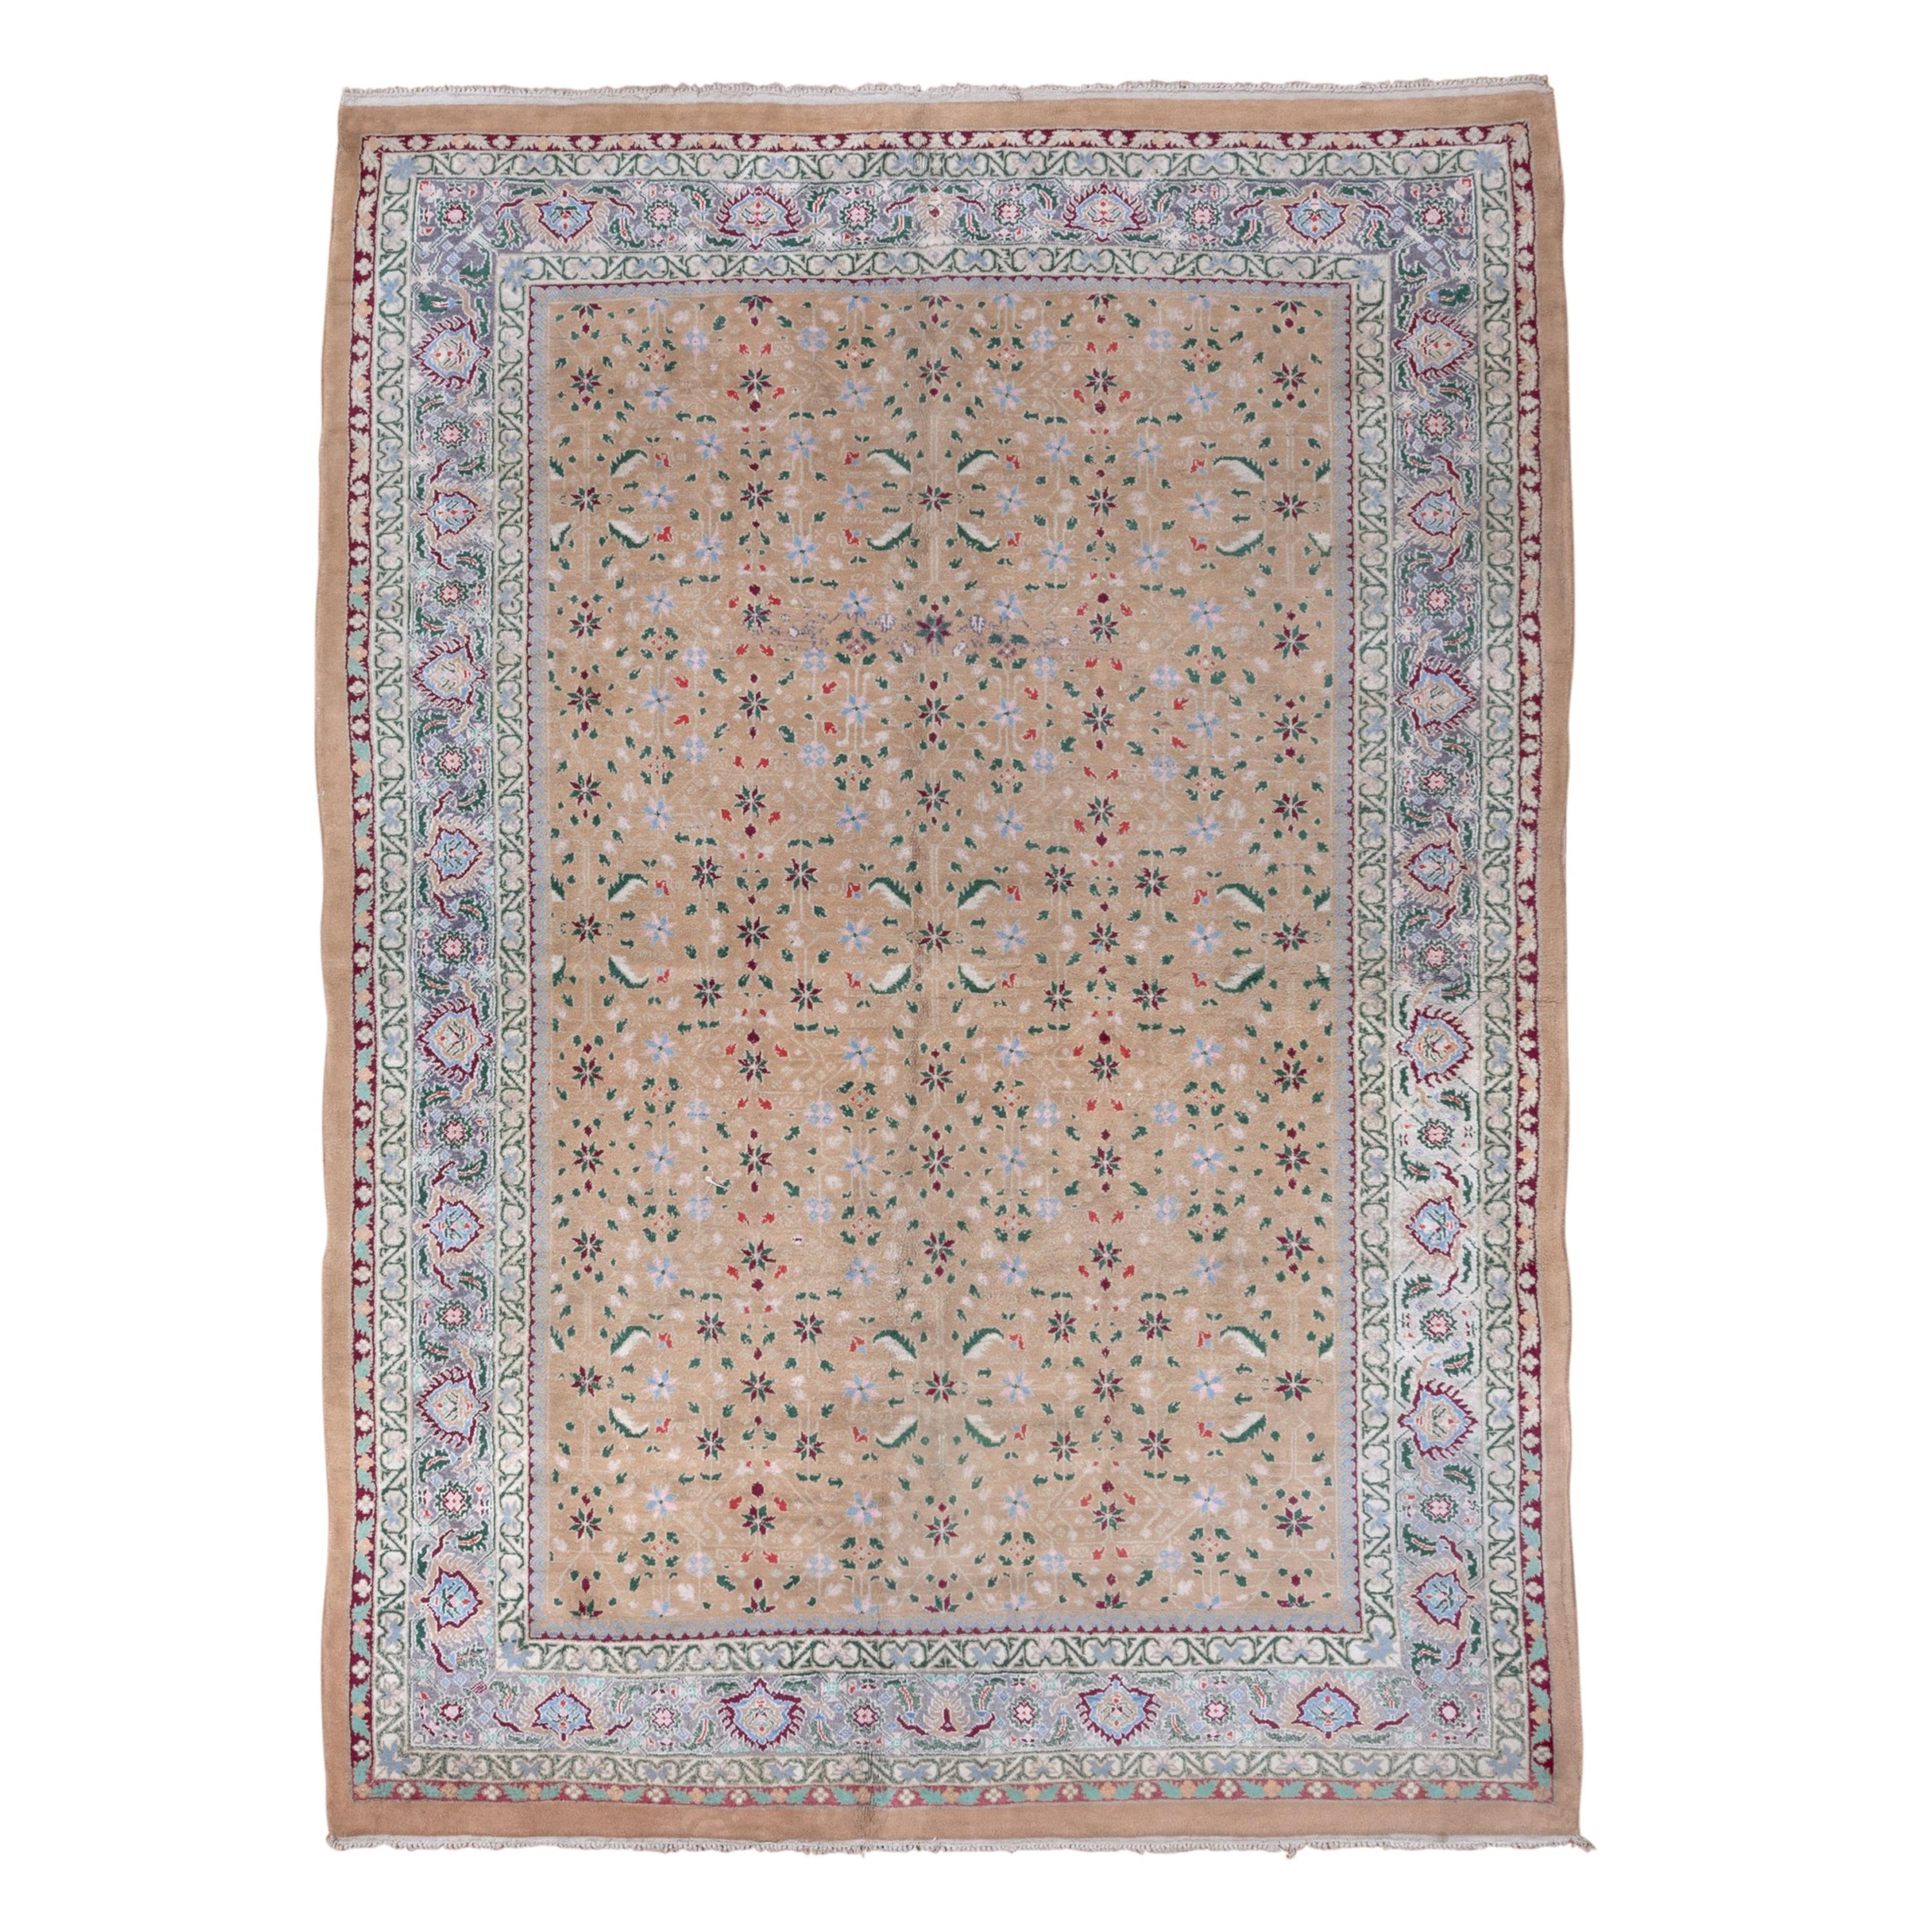 Authentic Indian Agra Carpet, Full Pile, Beige Field, Gorgeous Border For Sale